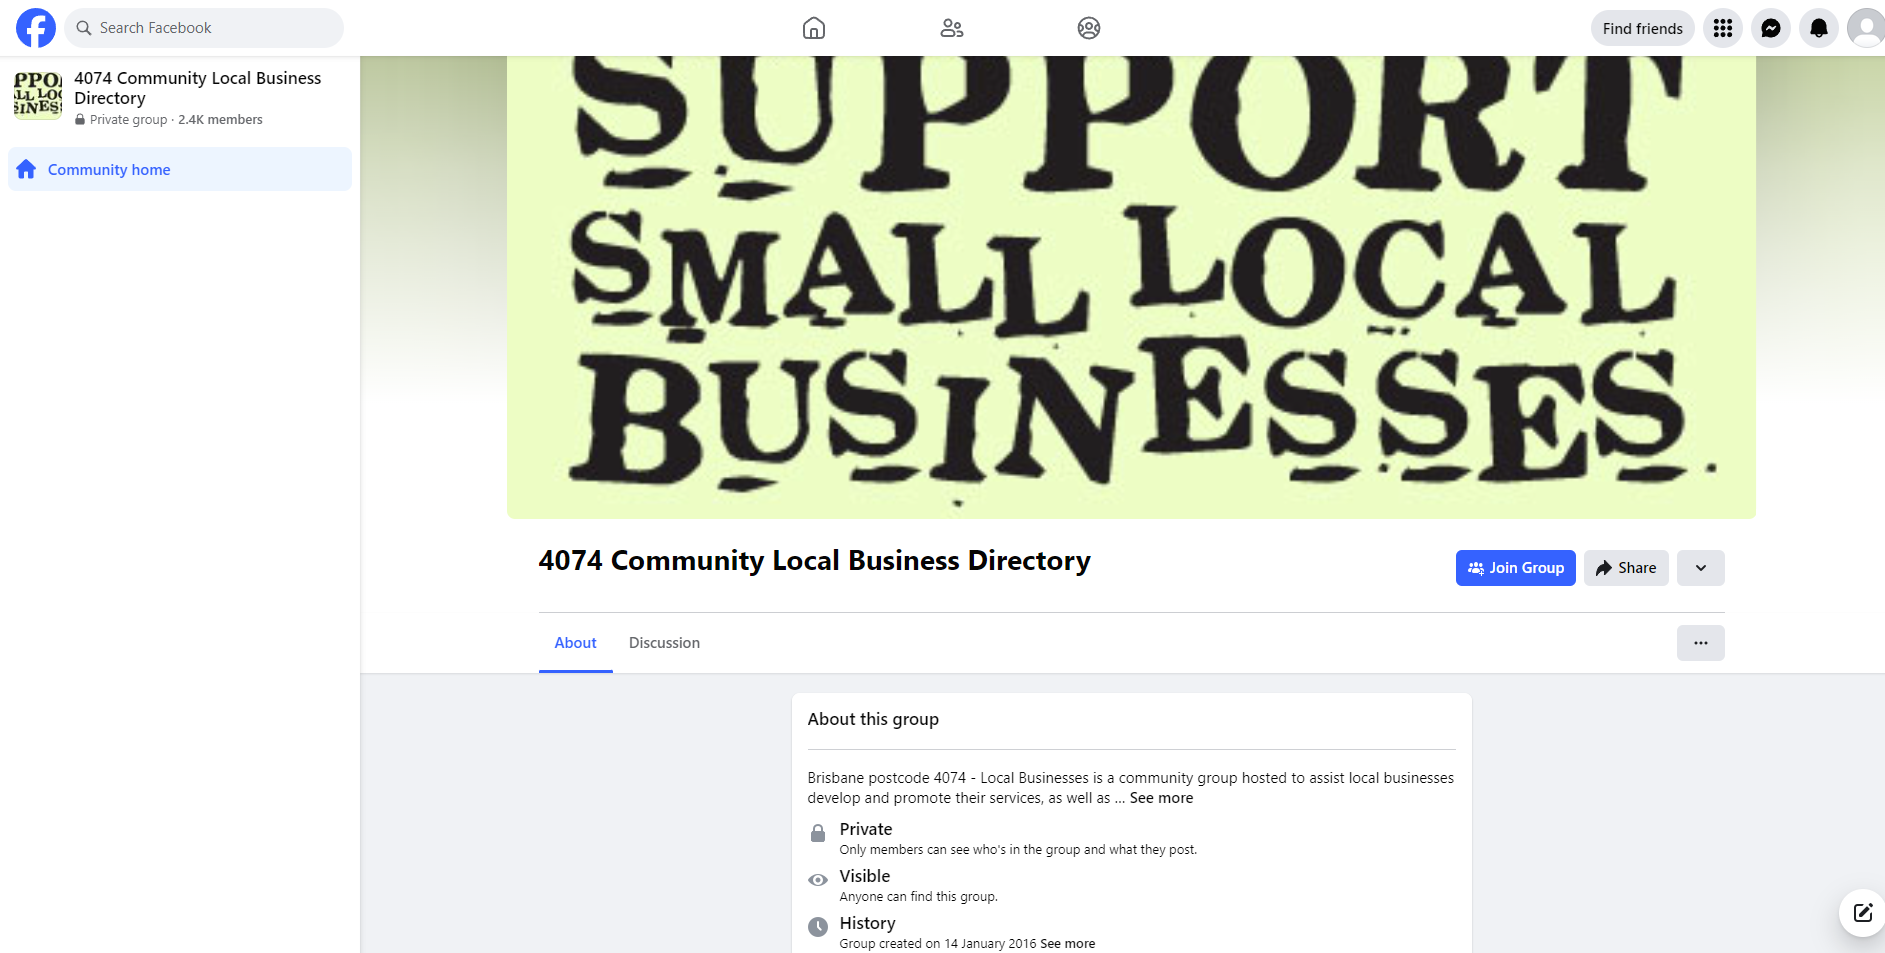 4074 Community Local Business Directory